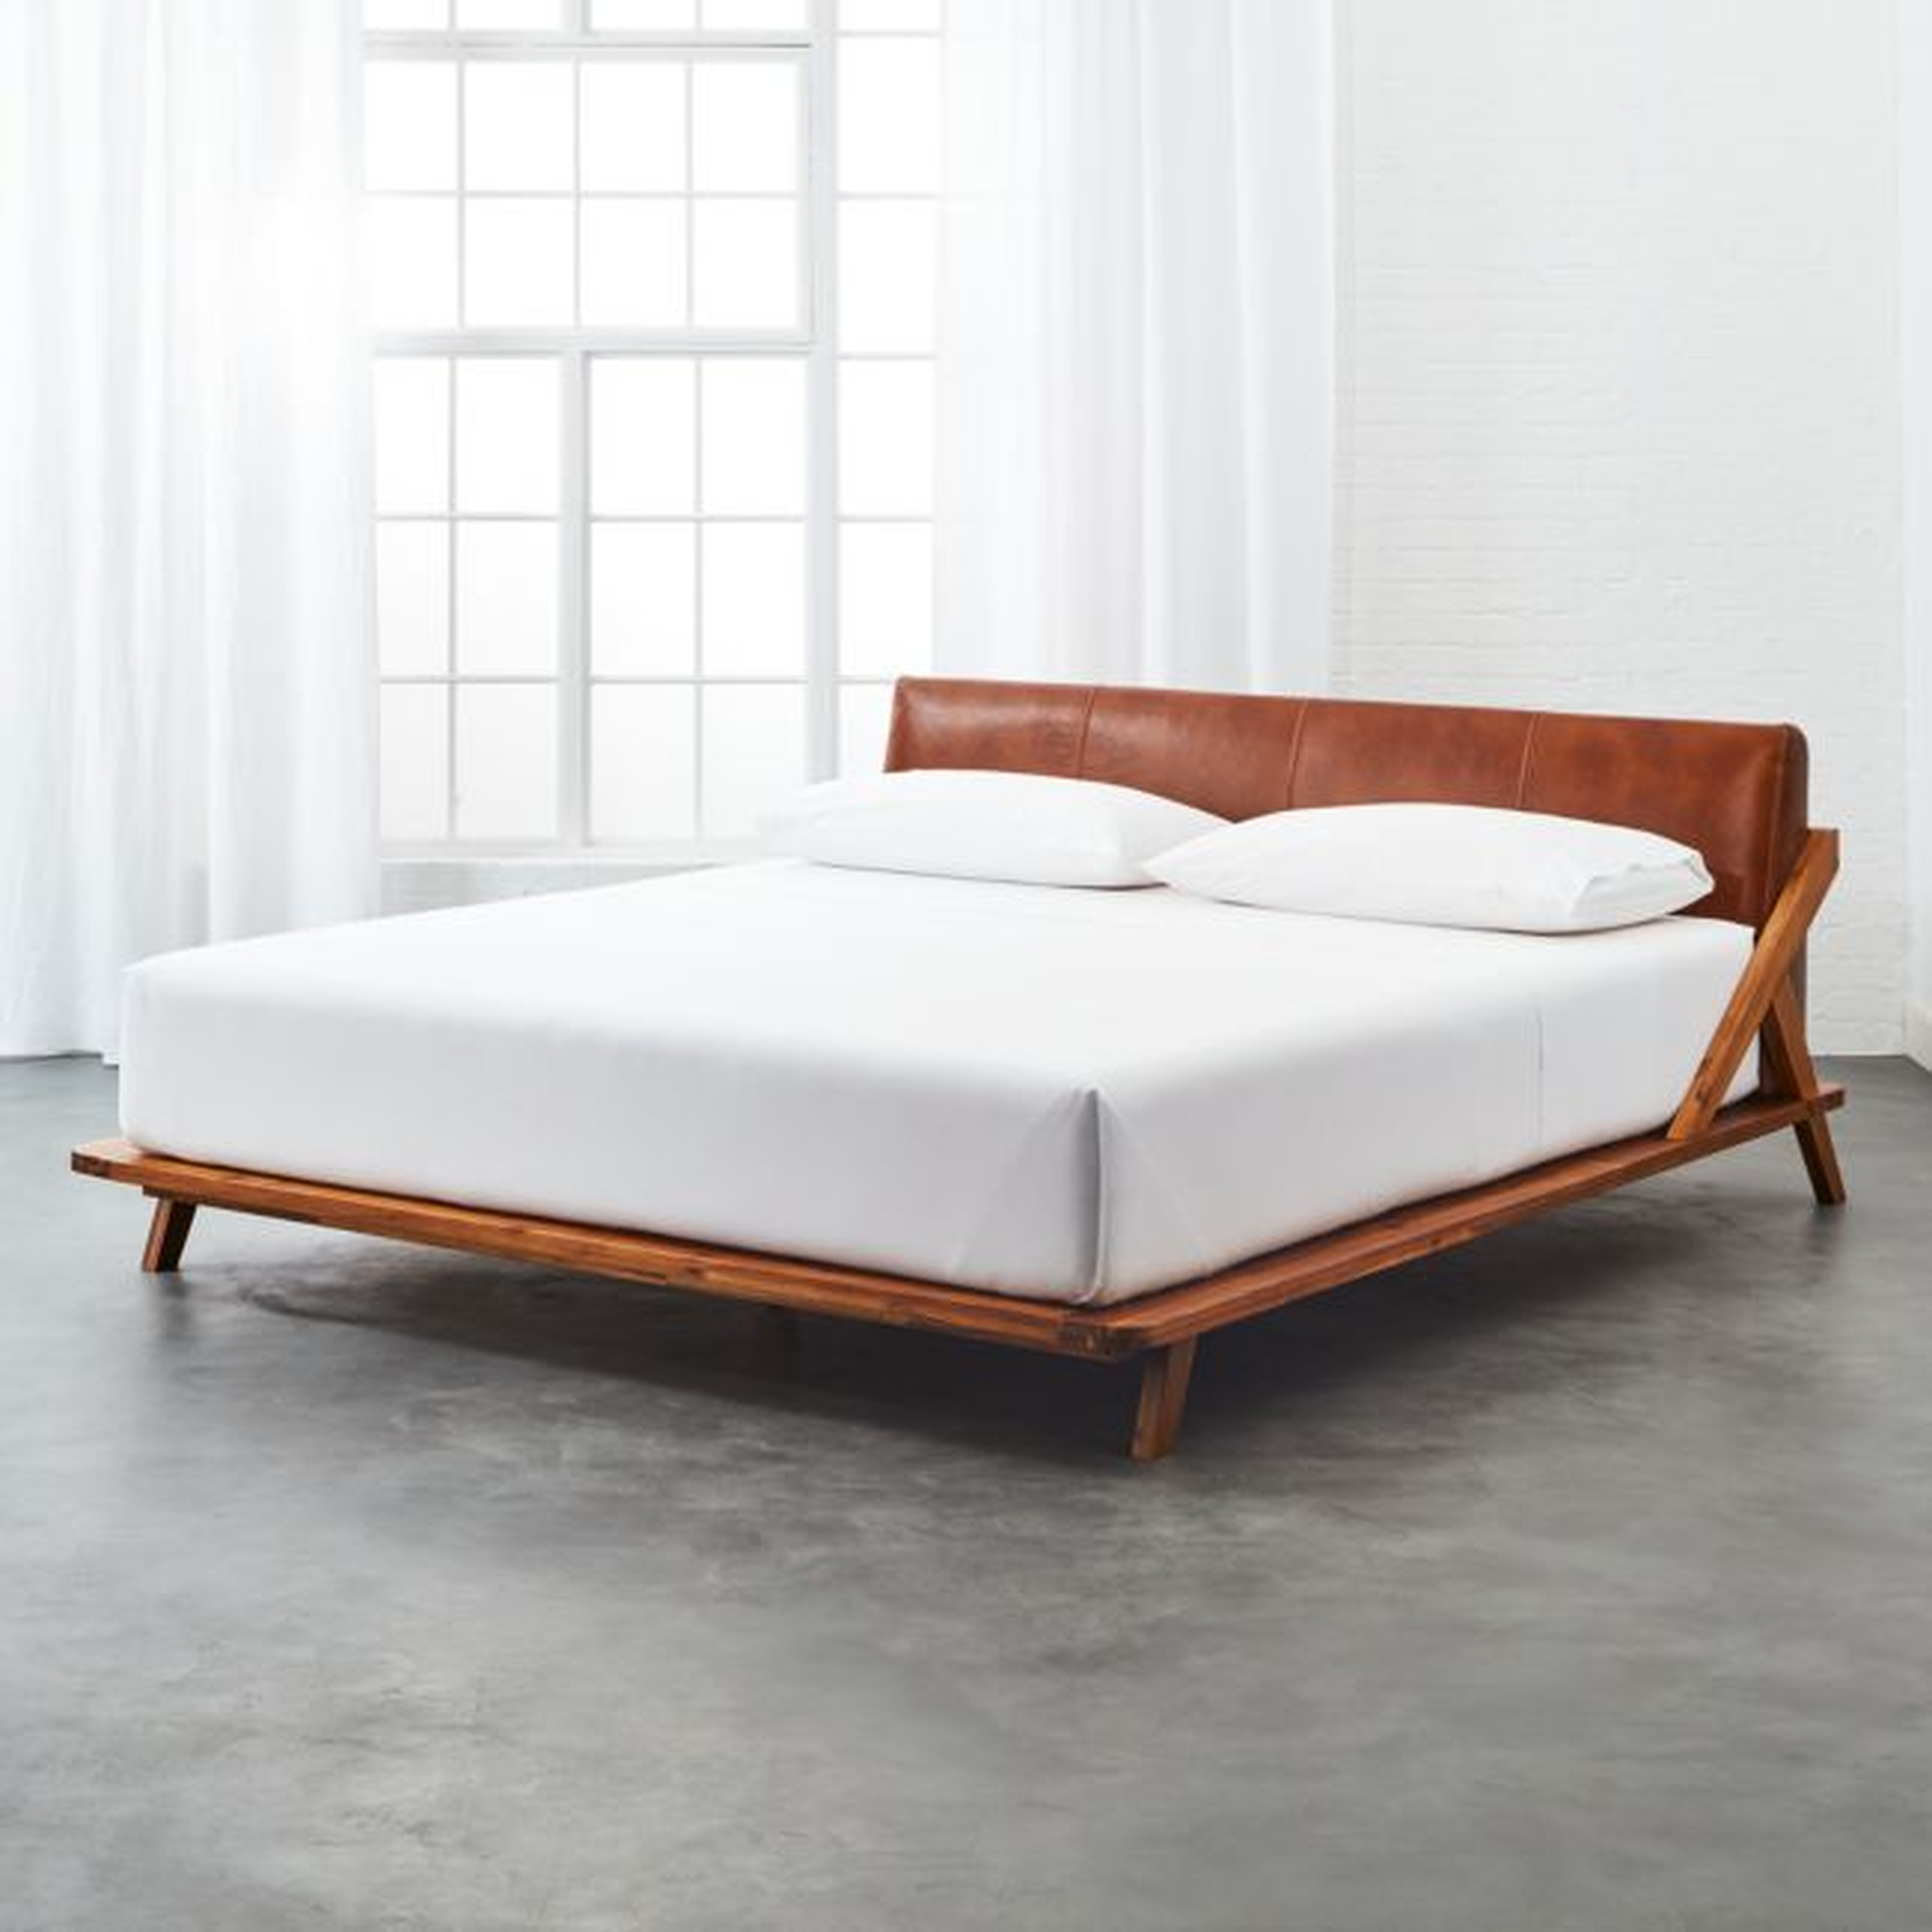 Drommen Acacia Wood Platform King Bed with Leather Headboard - CB2